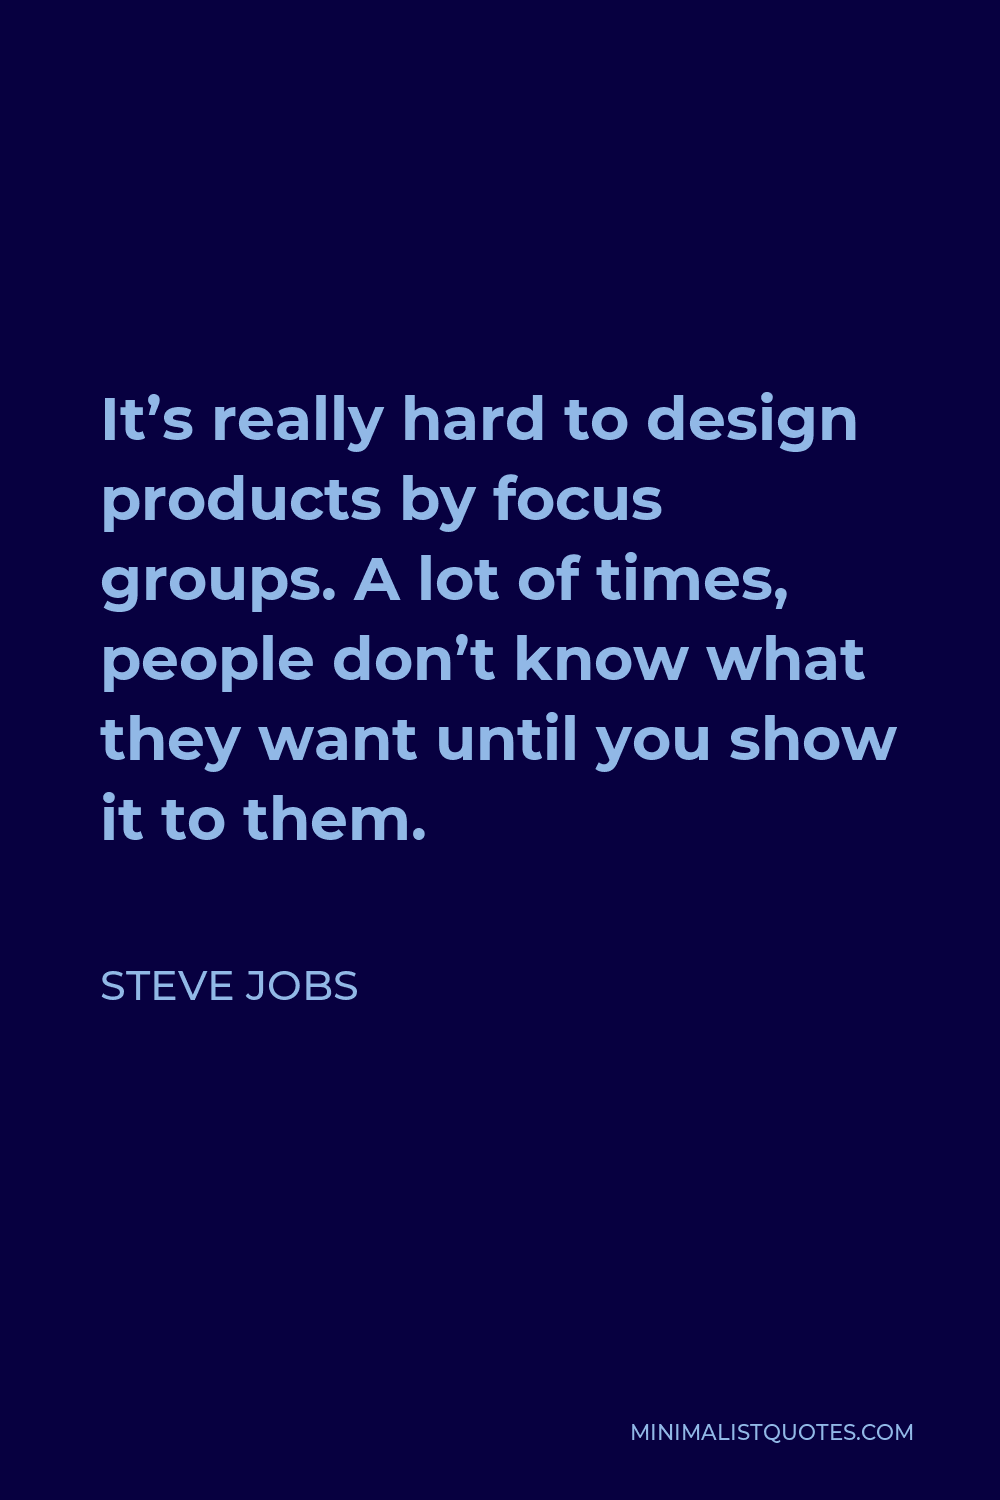 Steve Jobs Quote - It’s really hard to design products by focus groups. A lot of times, people don’t know what they want until you show it to them.